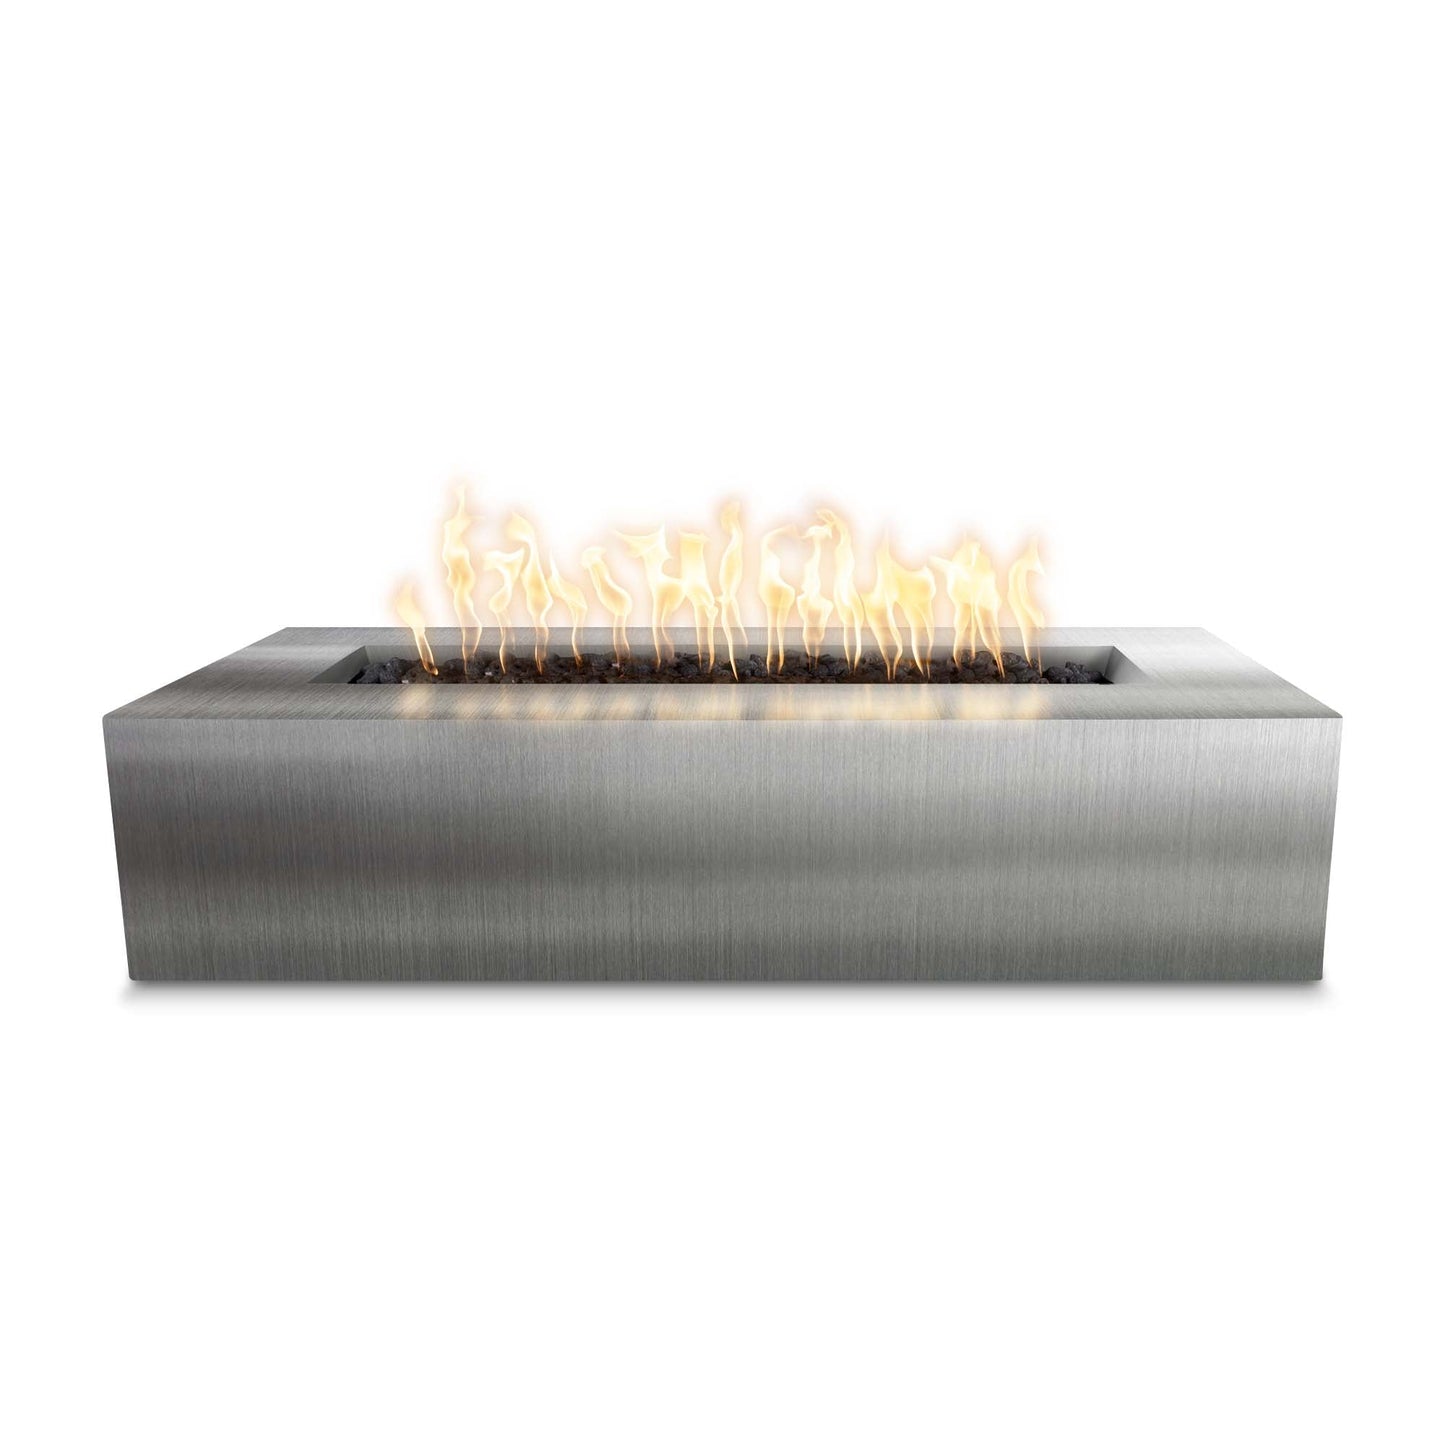 The Outdoor Plus Rectangular Regal 48" Stainless Steel Natural Gas Fire Pit with 12V Electronic Ignition